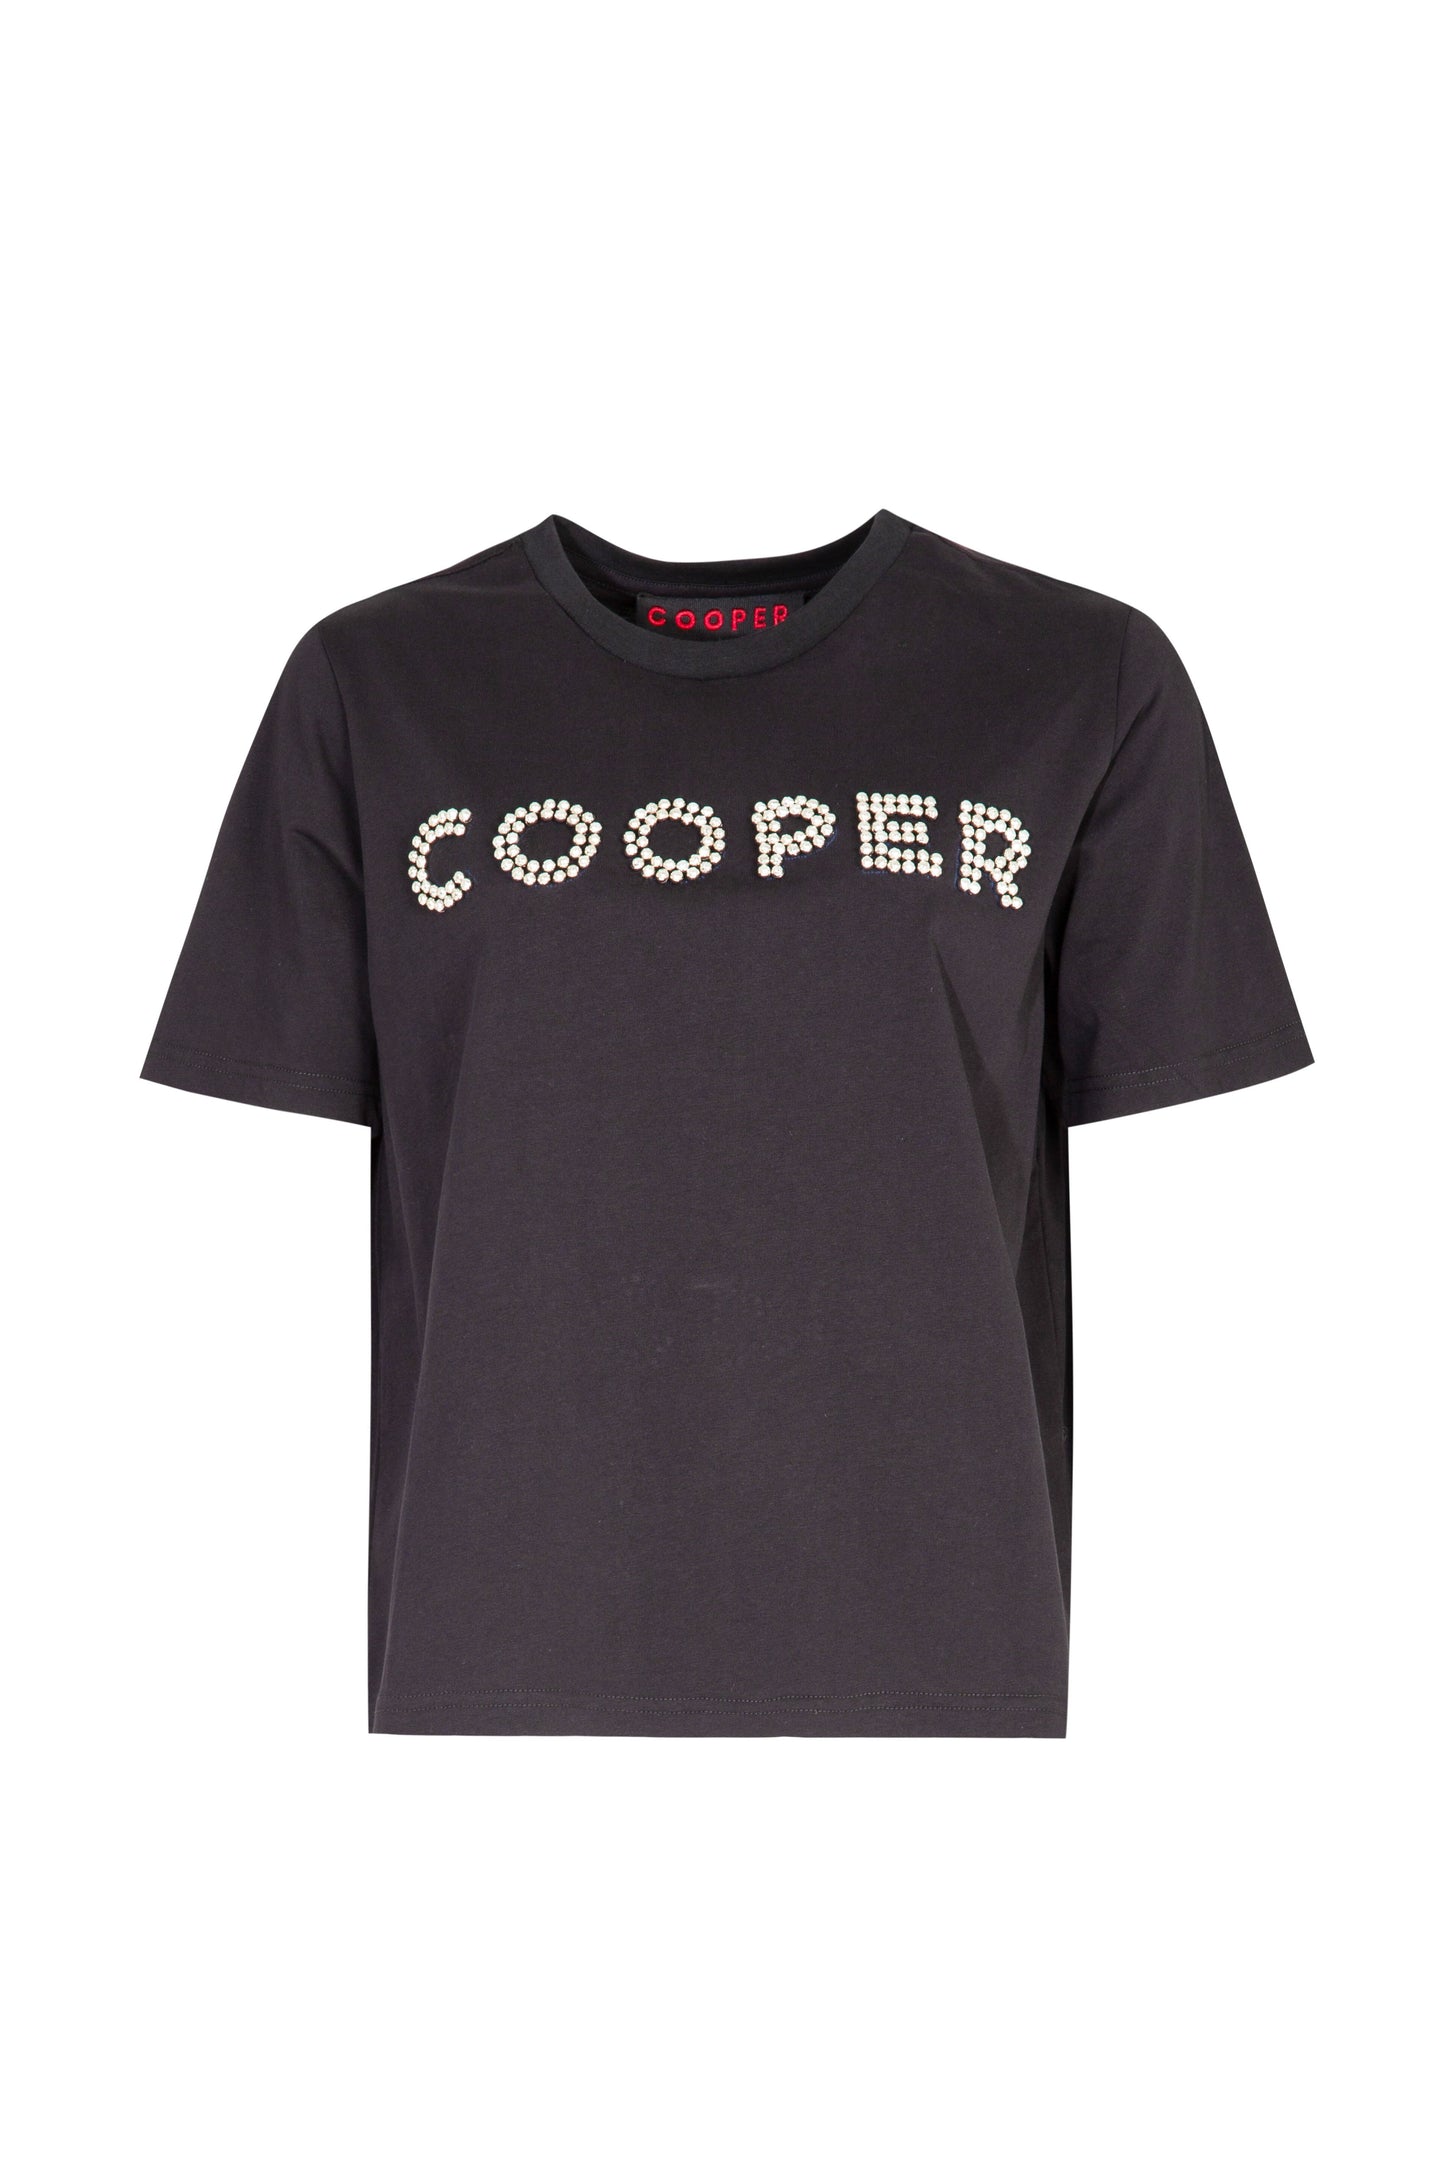 COOPER MY BEADING LADY T-SHIRT - BLACK - THE VOGUE STORE